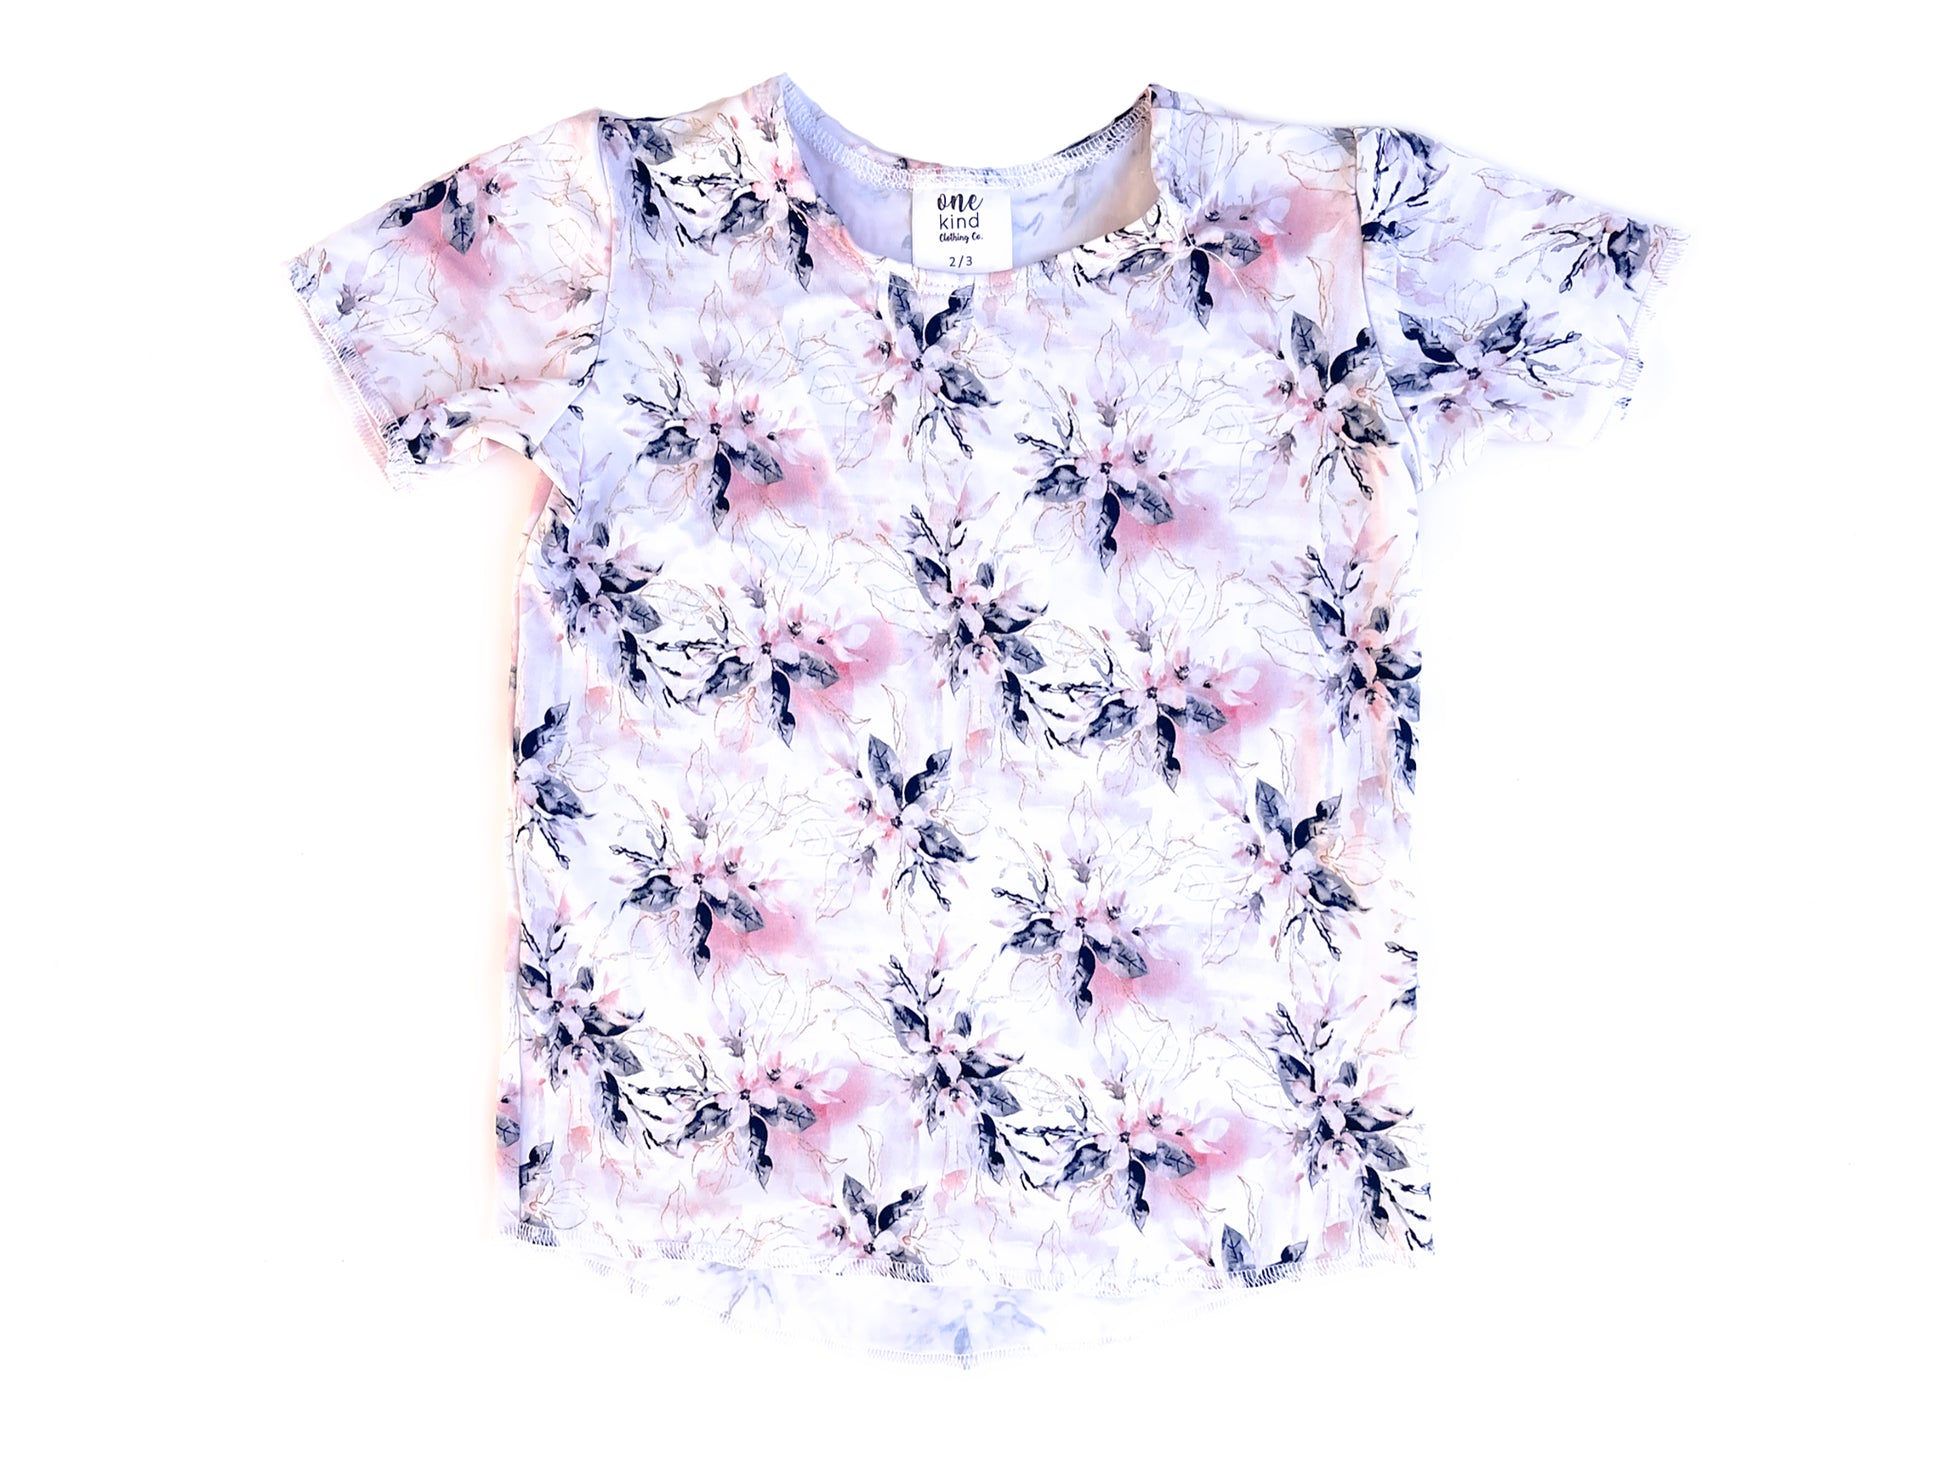 Slouchy Tee | Pink Floral - One Kind Clothing, LLC